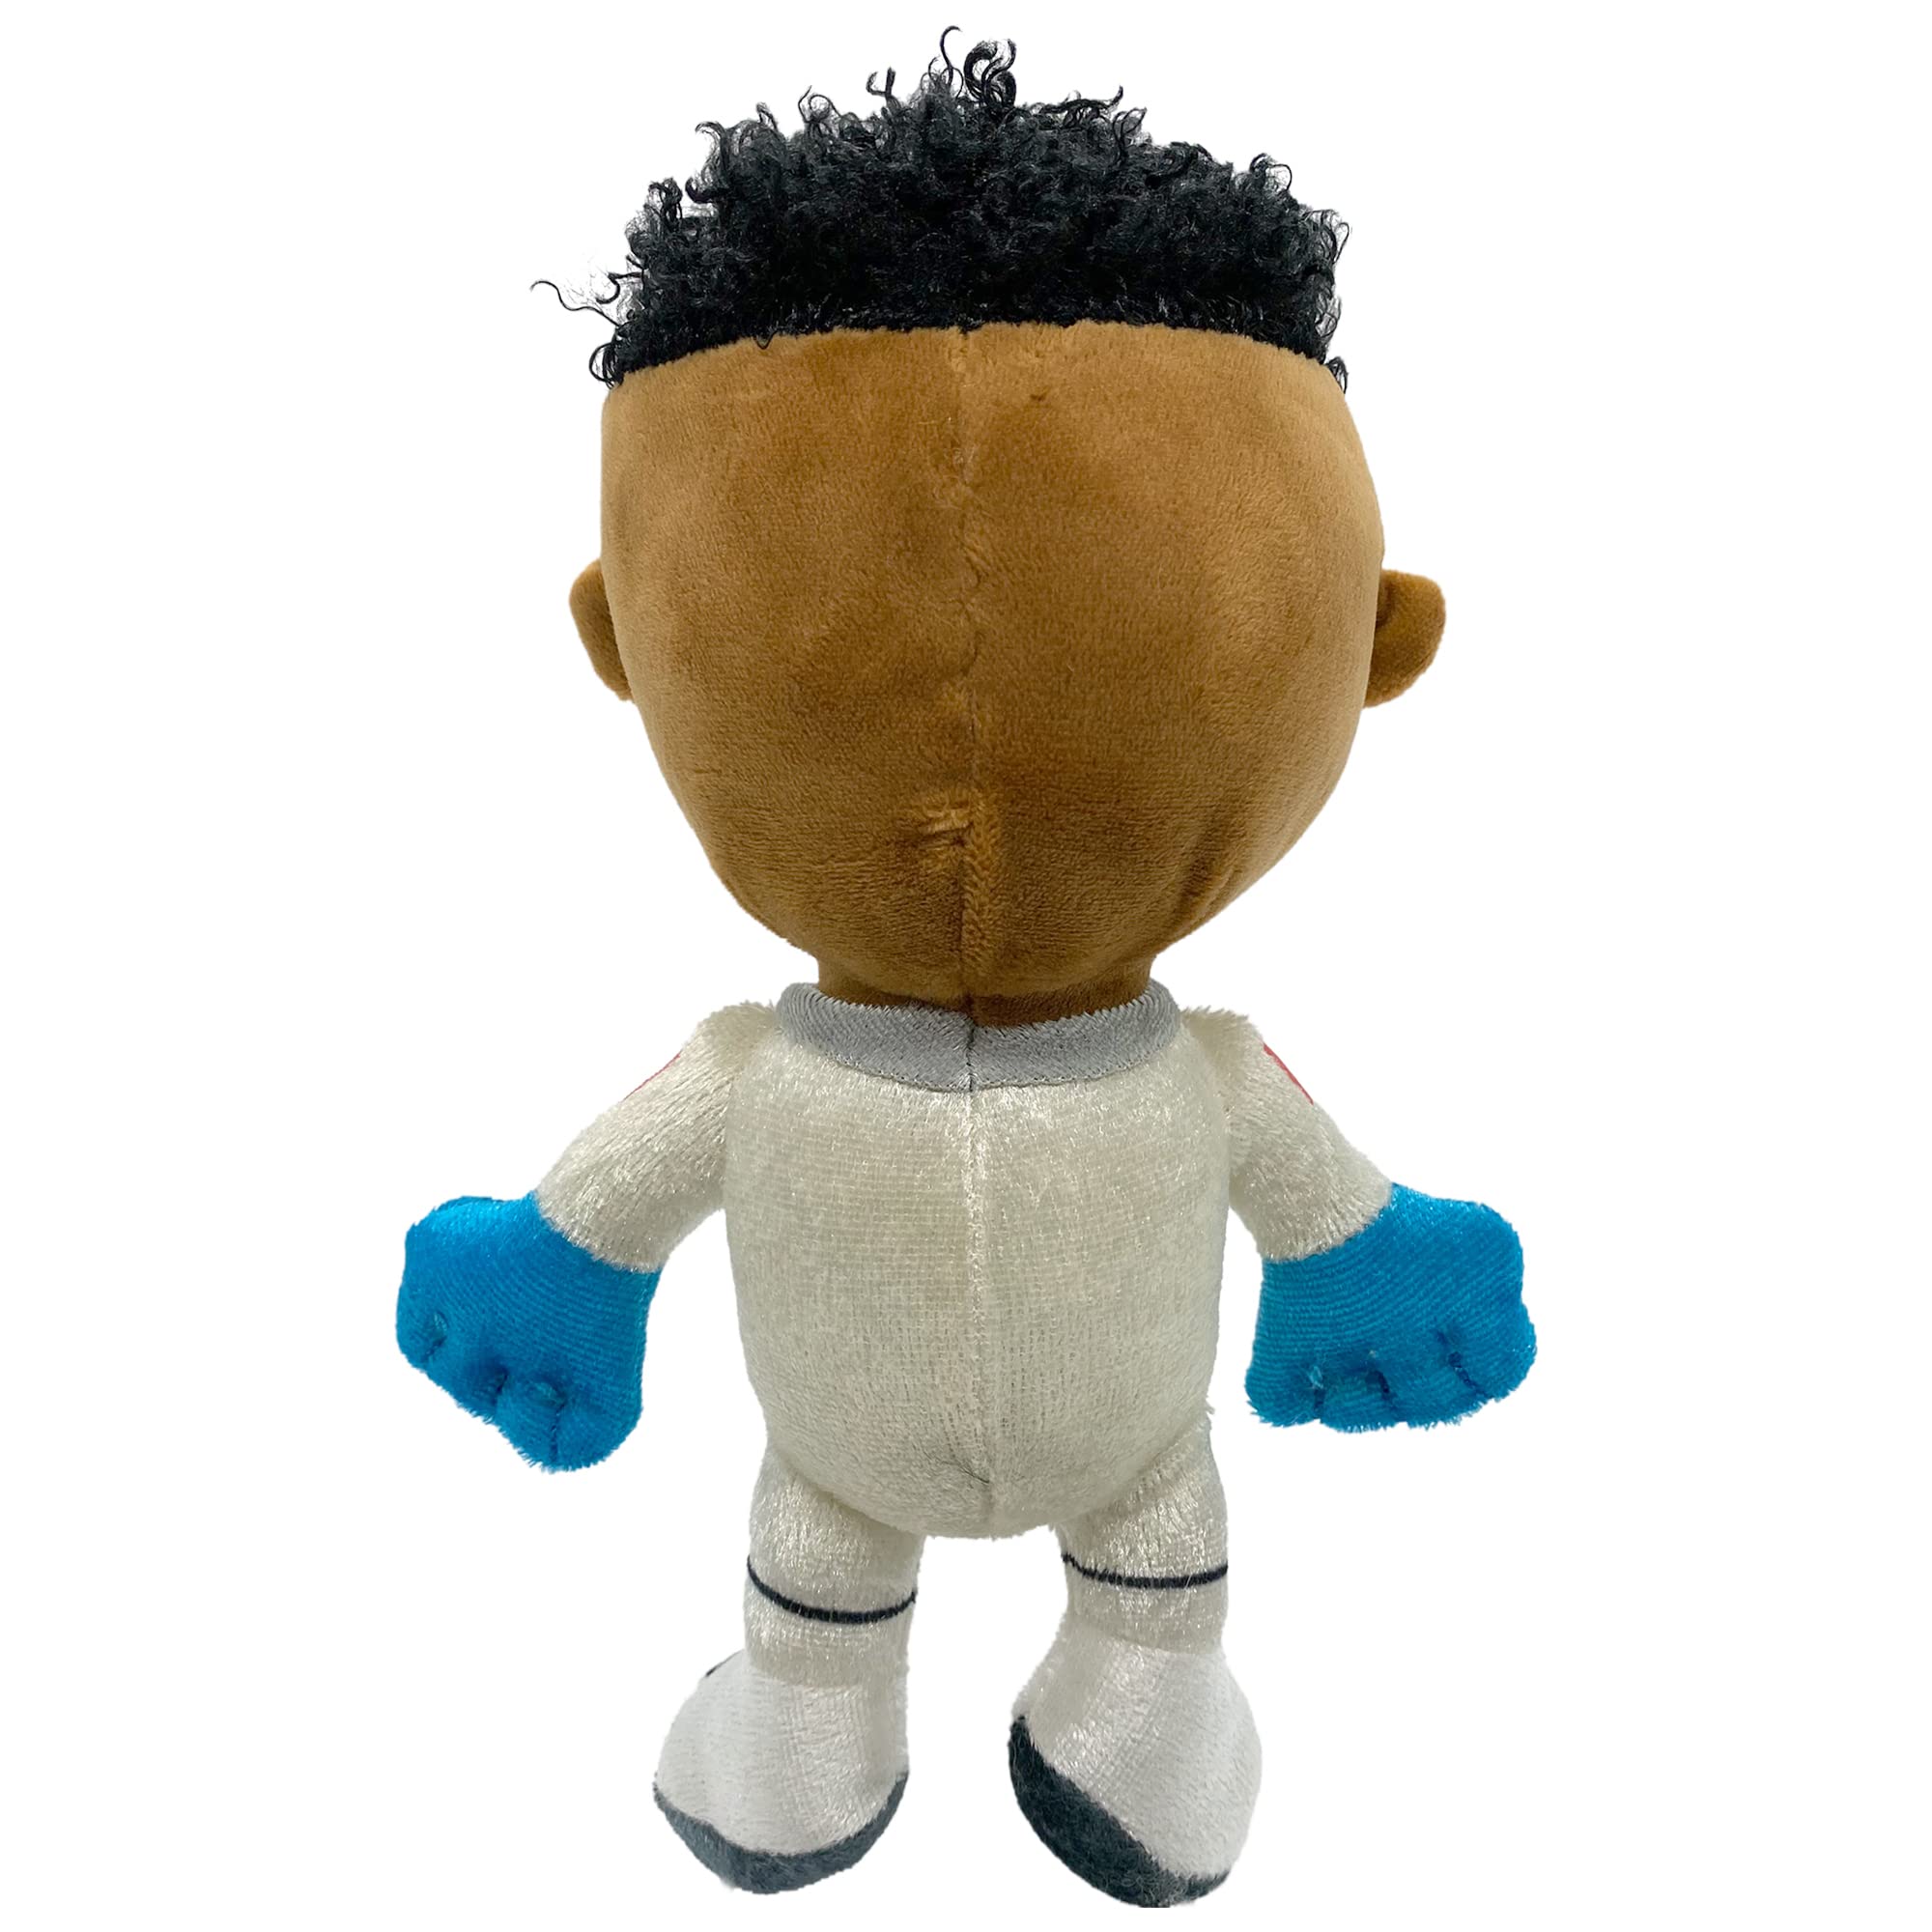 Jinx Official Peanuts Collectible Plush Franklin, Excellent Plushie Toy for Toddlers & Preschool, White NASA Astronaut, Snoopy Team